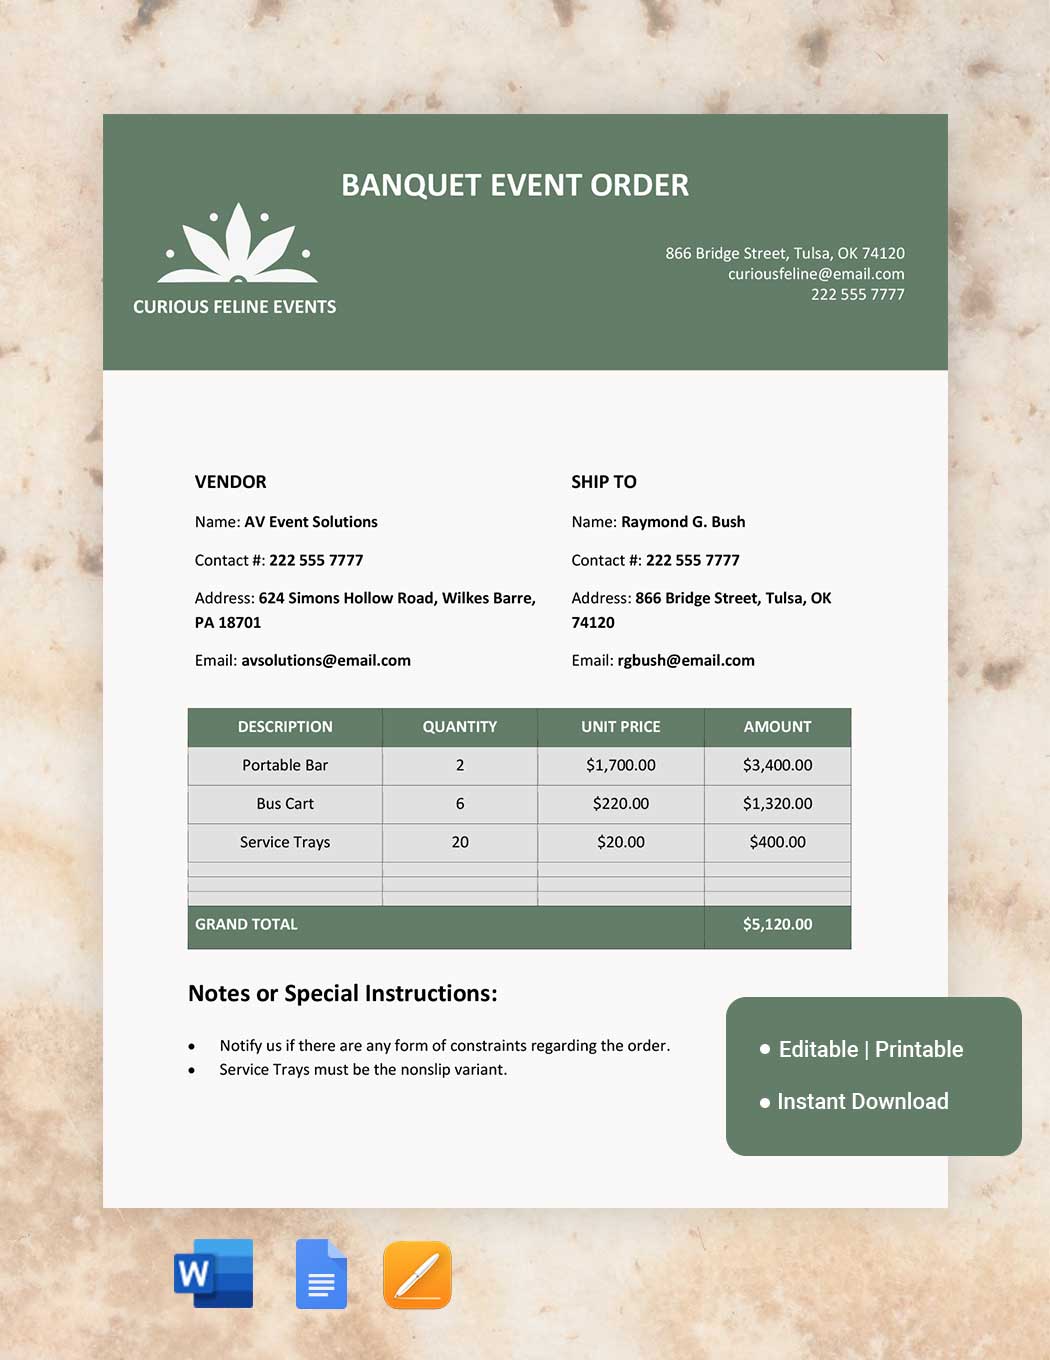 FREE Banquet Event Order (BEO) Template Download in Word, Google Docs